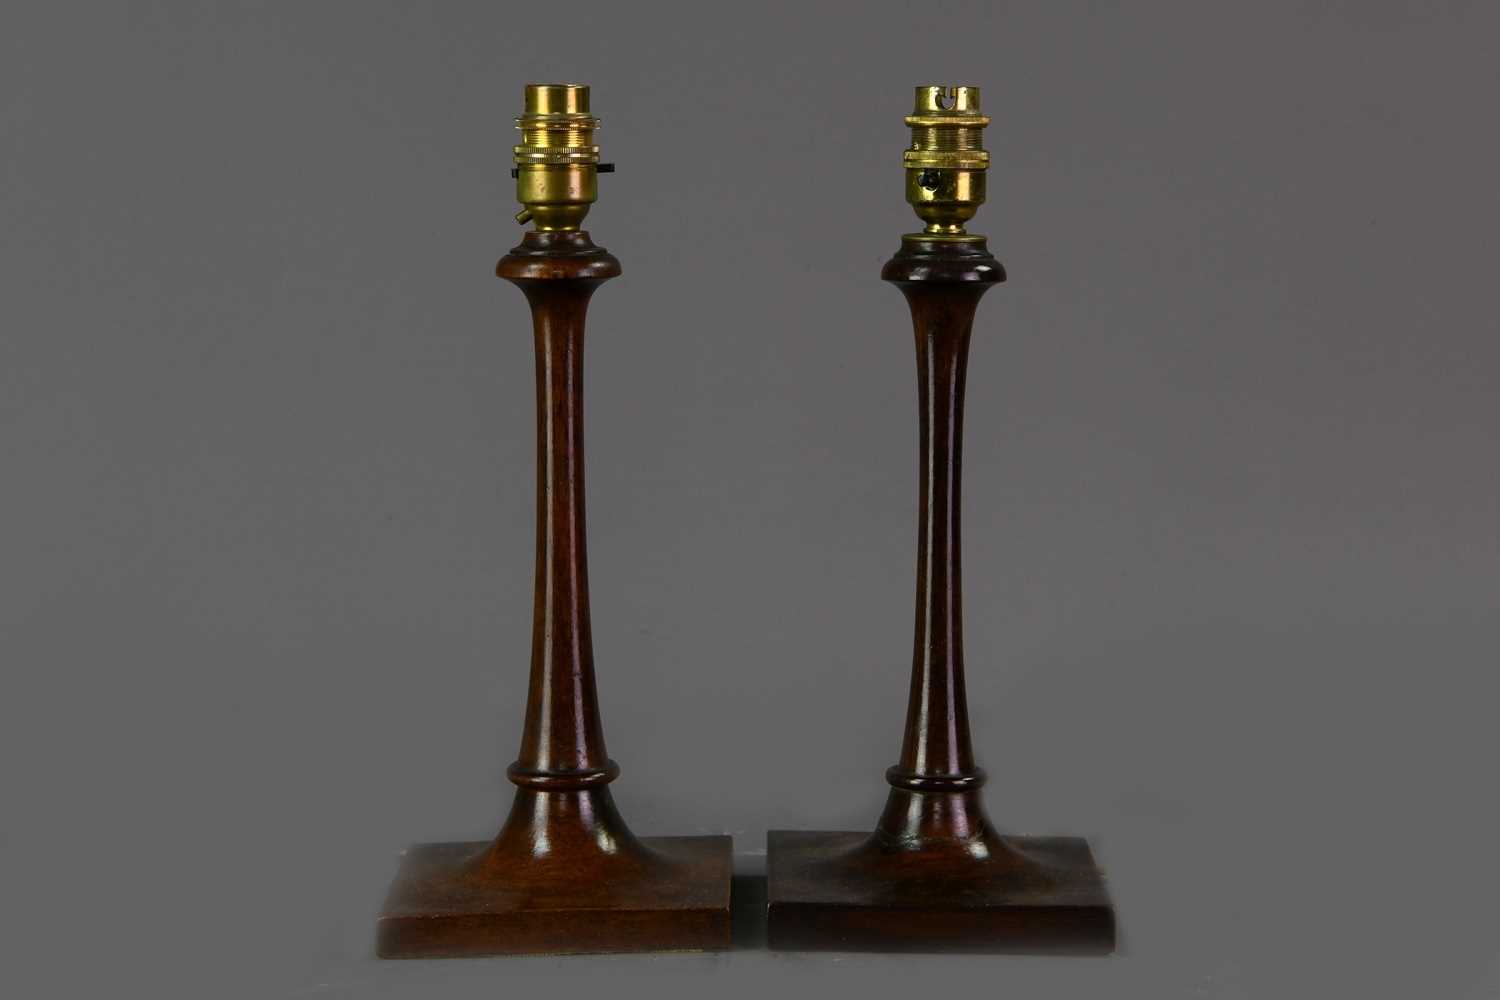 Lot 222 - A PAIR OF EARLY 20TH CENTURY MAHOGANY TABLE LAMPS